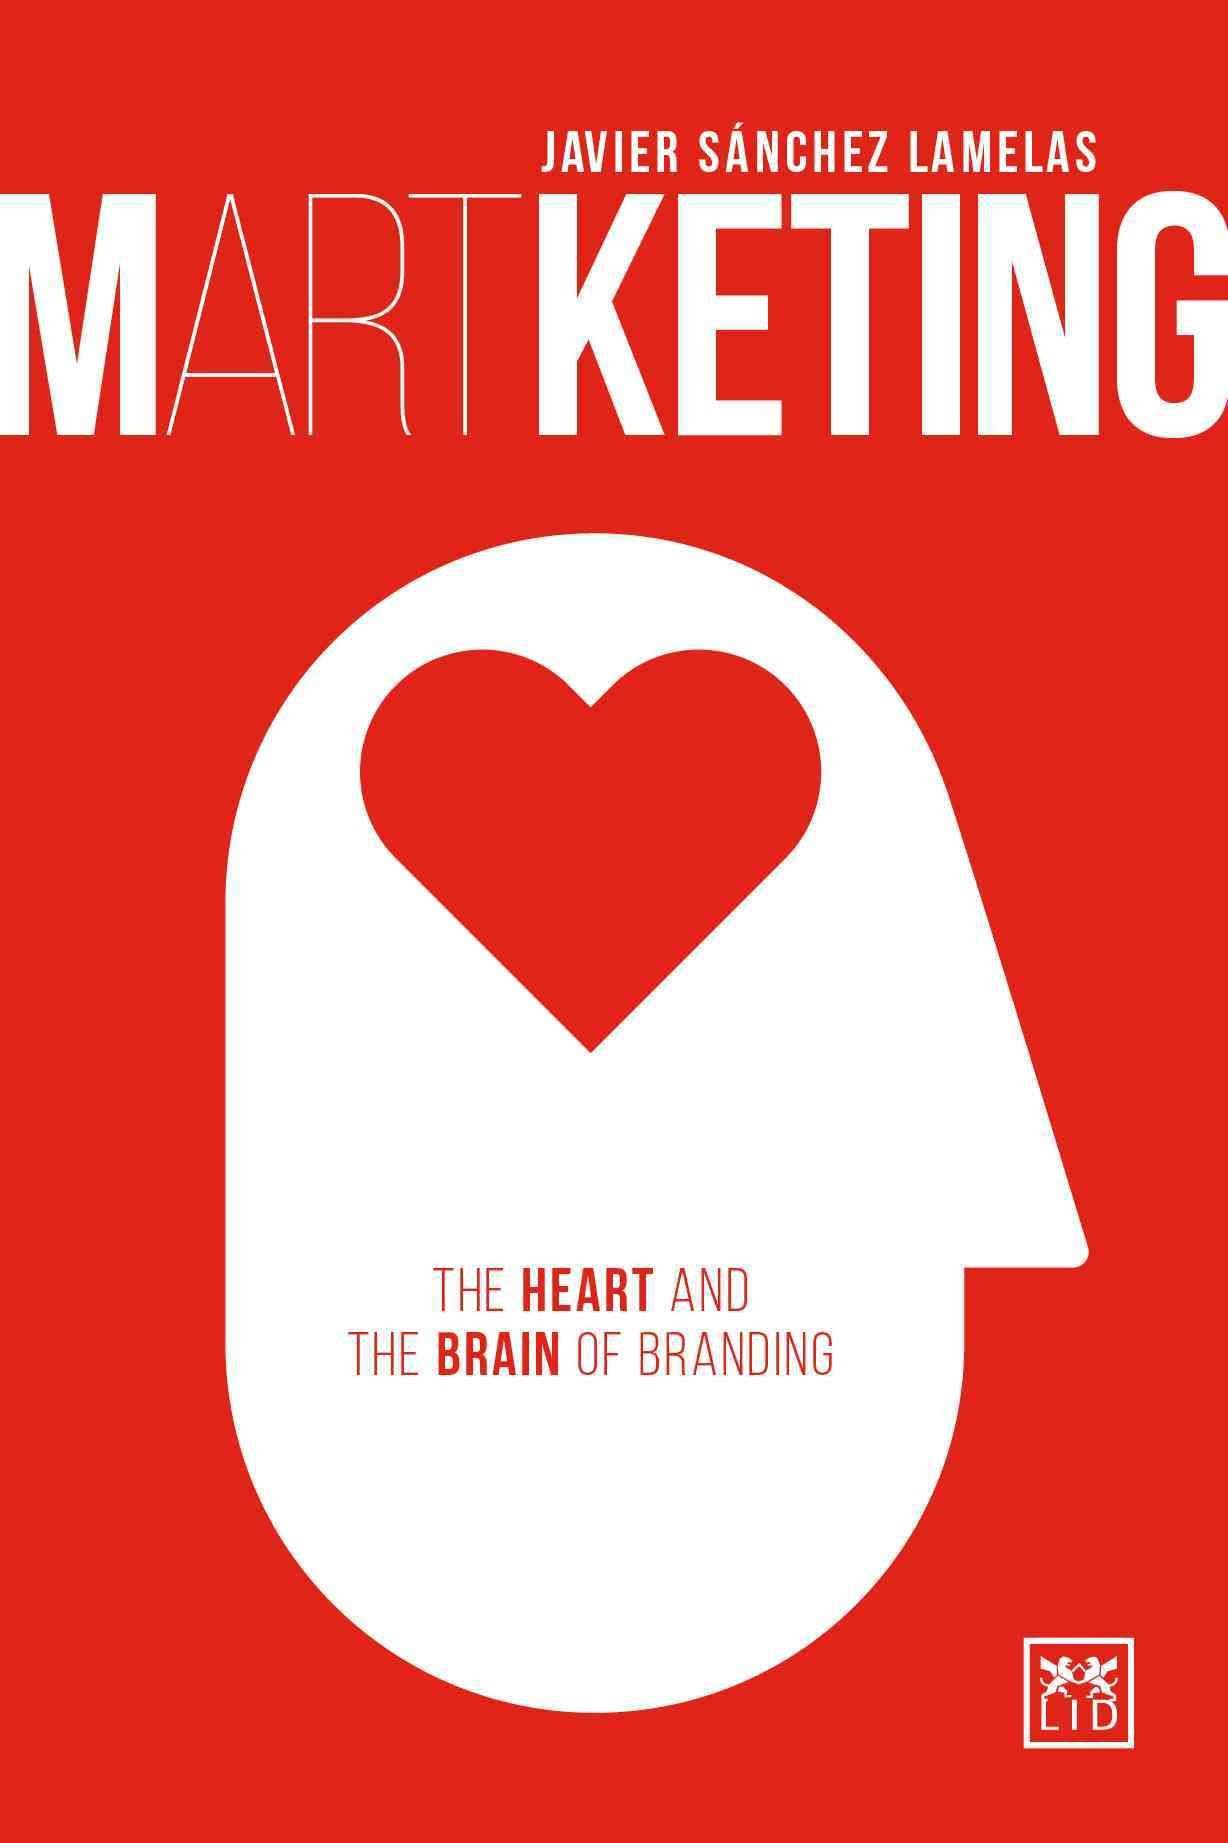 Martketing: The Heart and Brain of Branding 2016